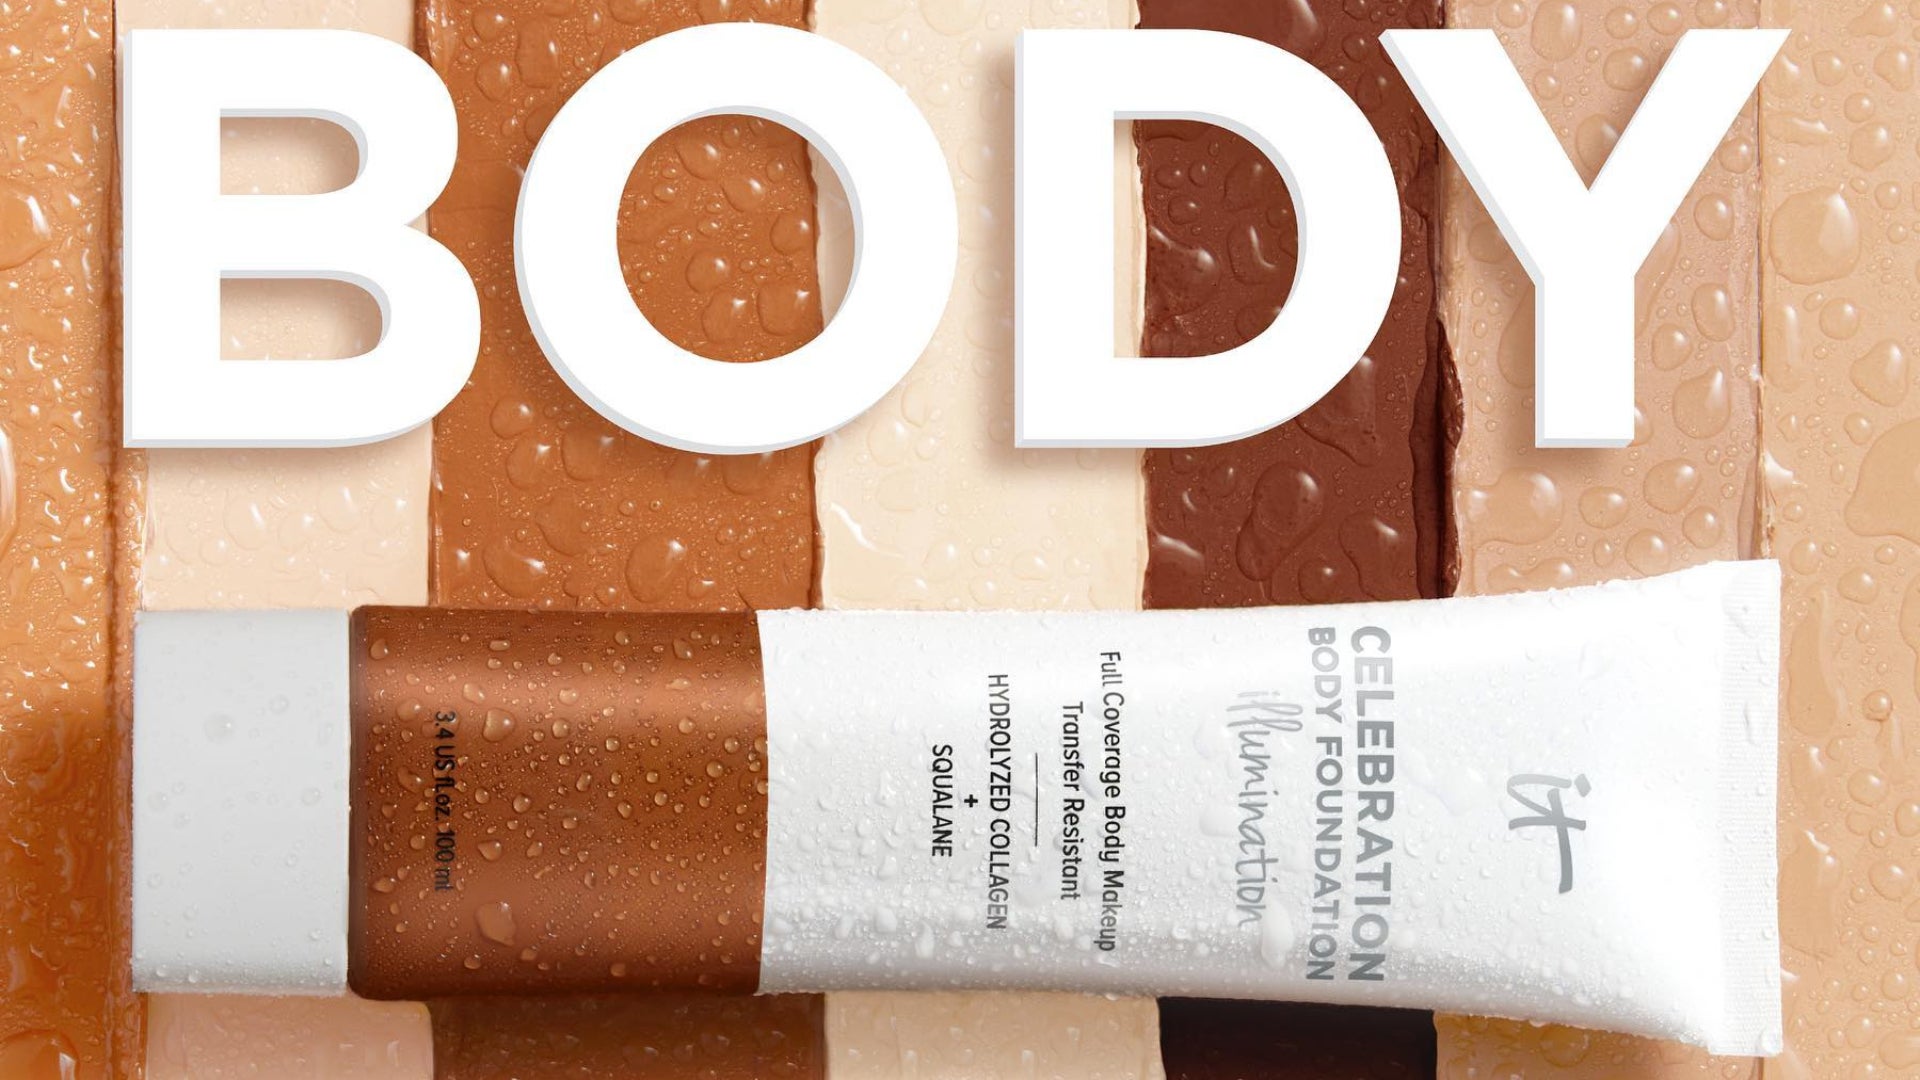 IT Cosmetics Just Launched A Foundation For Your Body, And It's A Game Changer